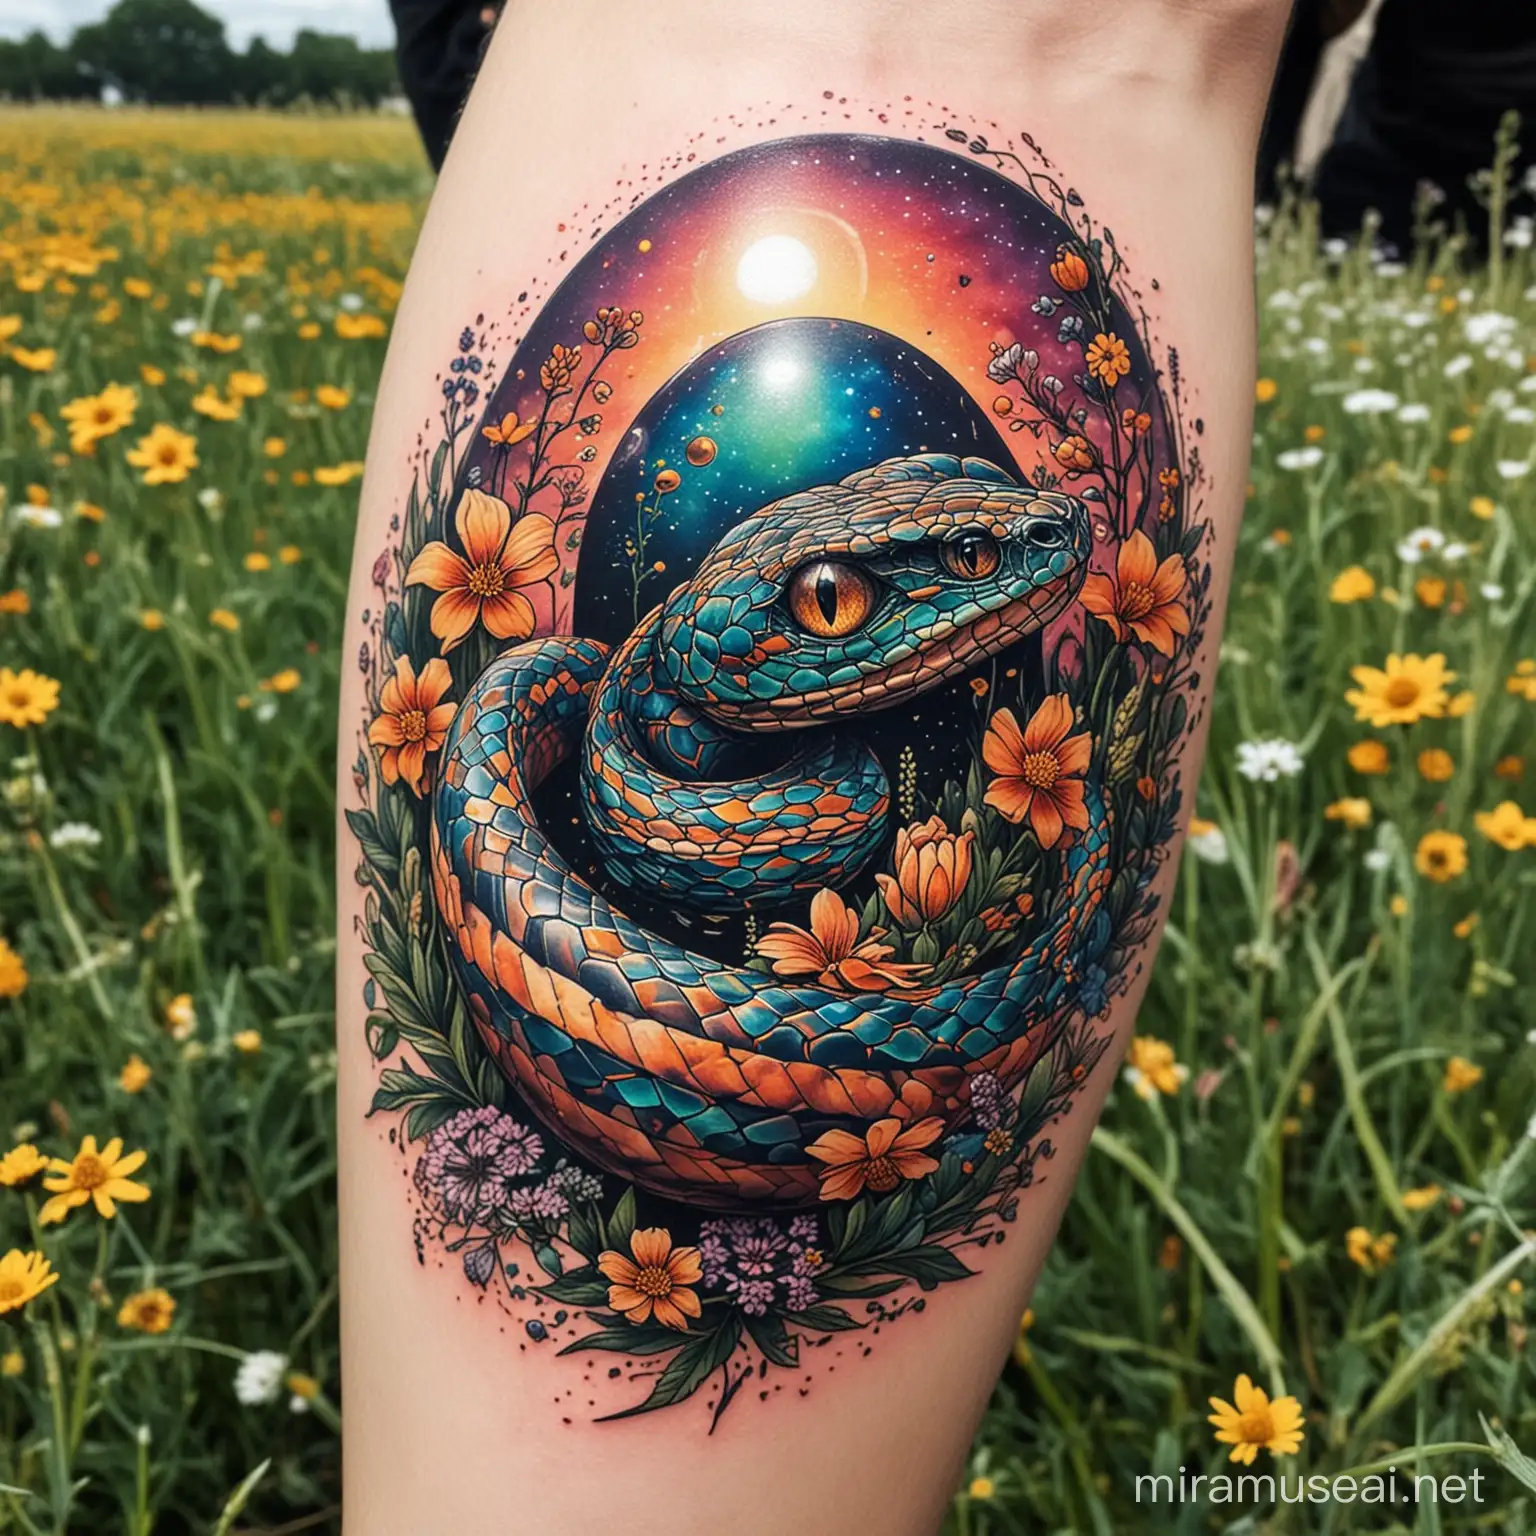 Make a futuristic tattoo with a small snake wrapped around a psychedelic egg in field of wild flowers